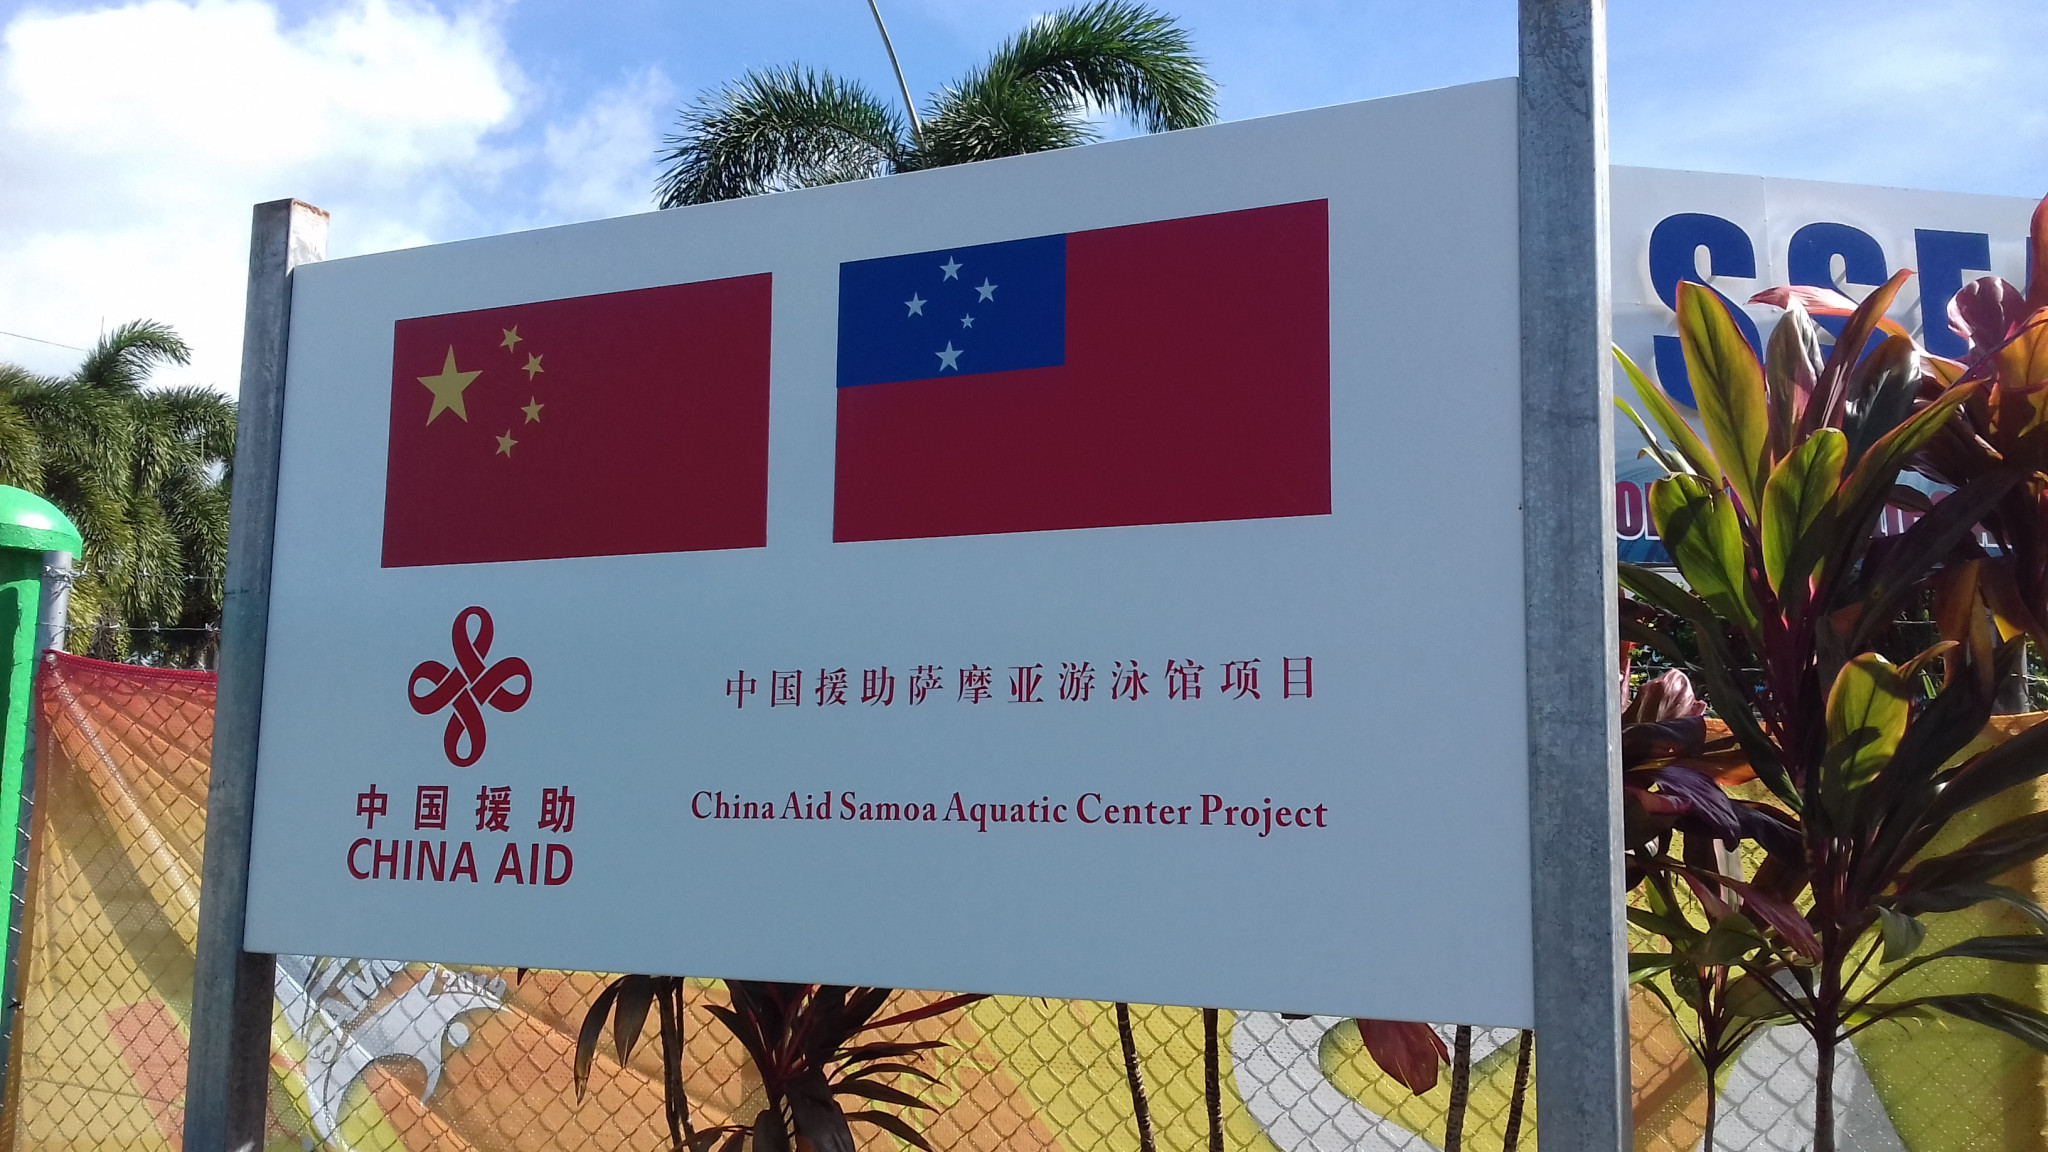 China's influence on the Samoa 2019 Pacific Games has been visible throughout ©ITG 